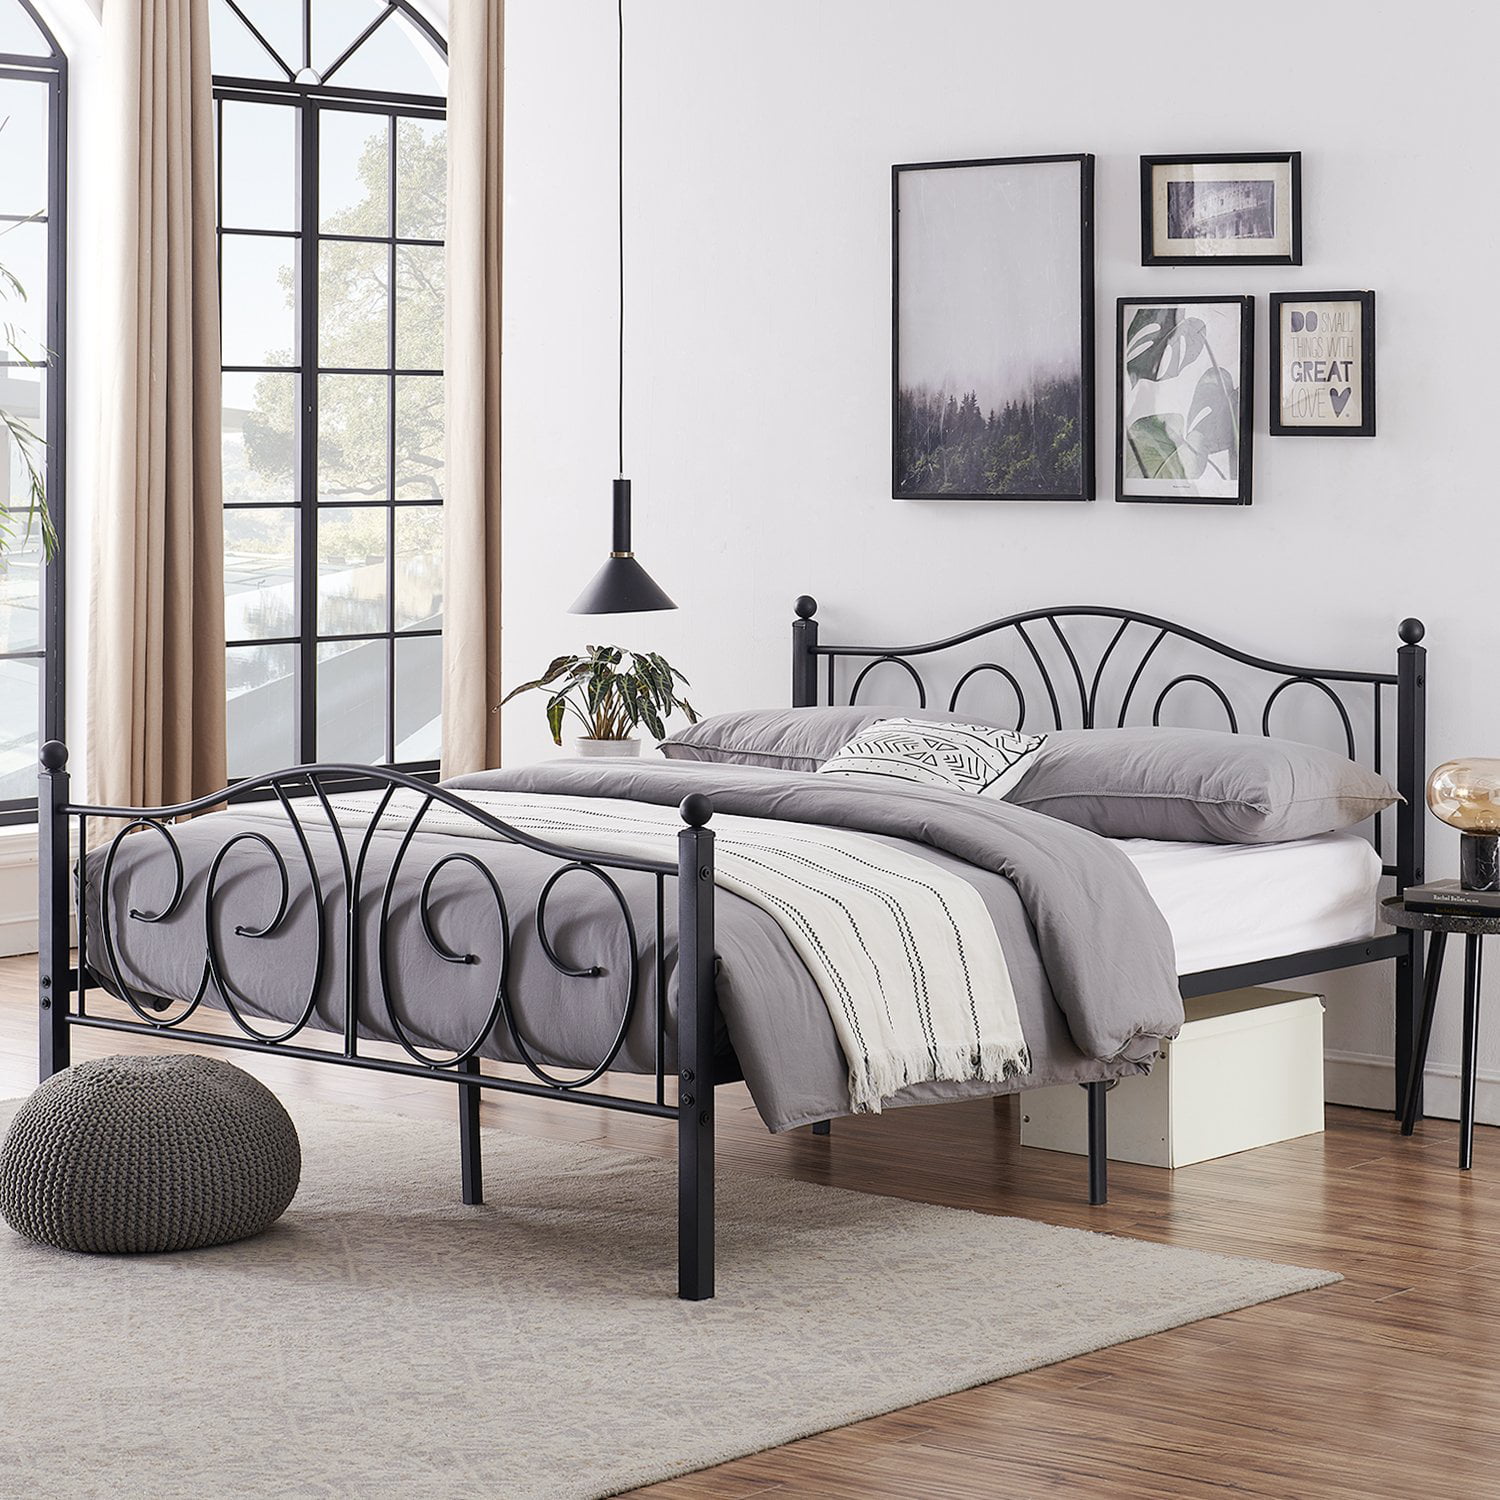 Vecelo Victorian Metal Platform Bed, Do You Need A Headboard And Footboard